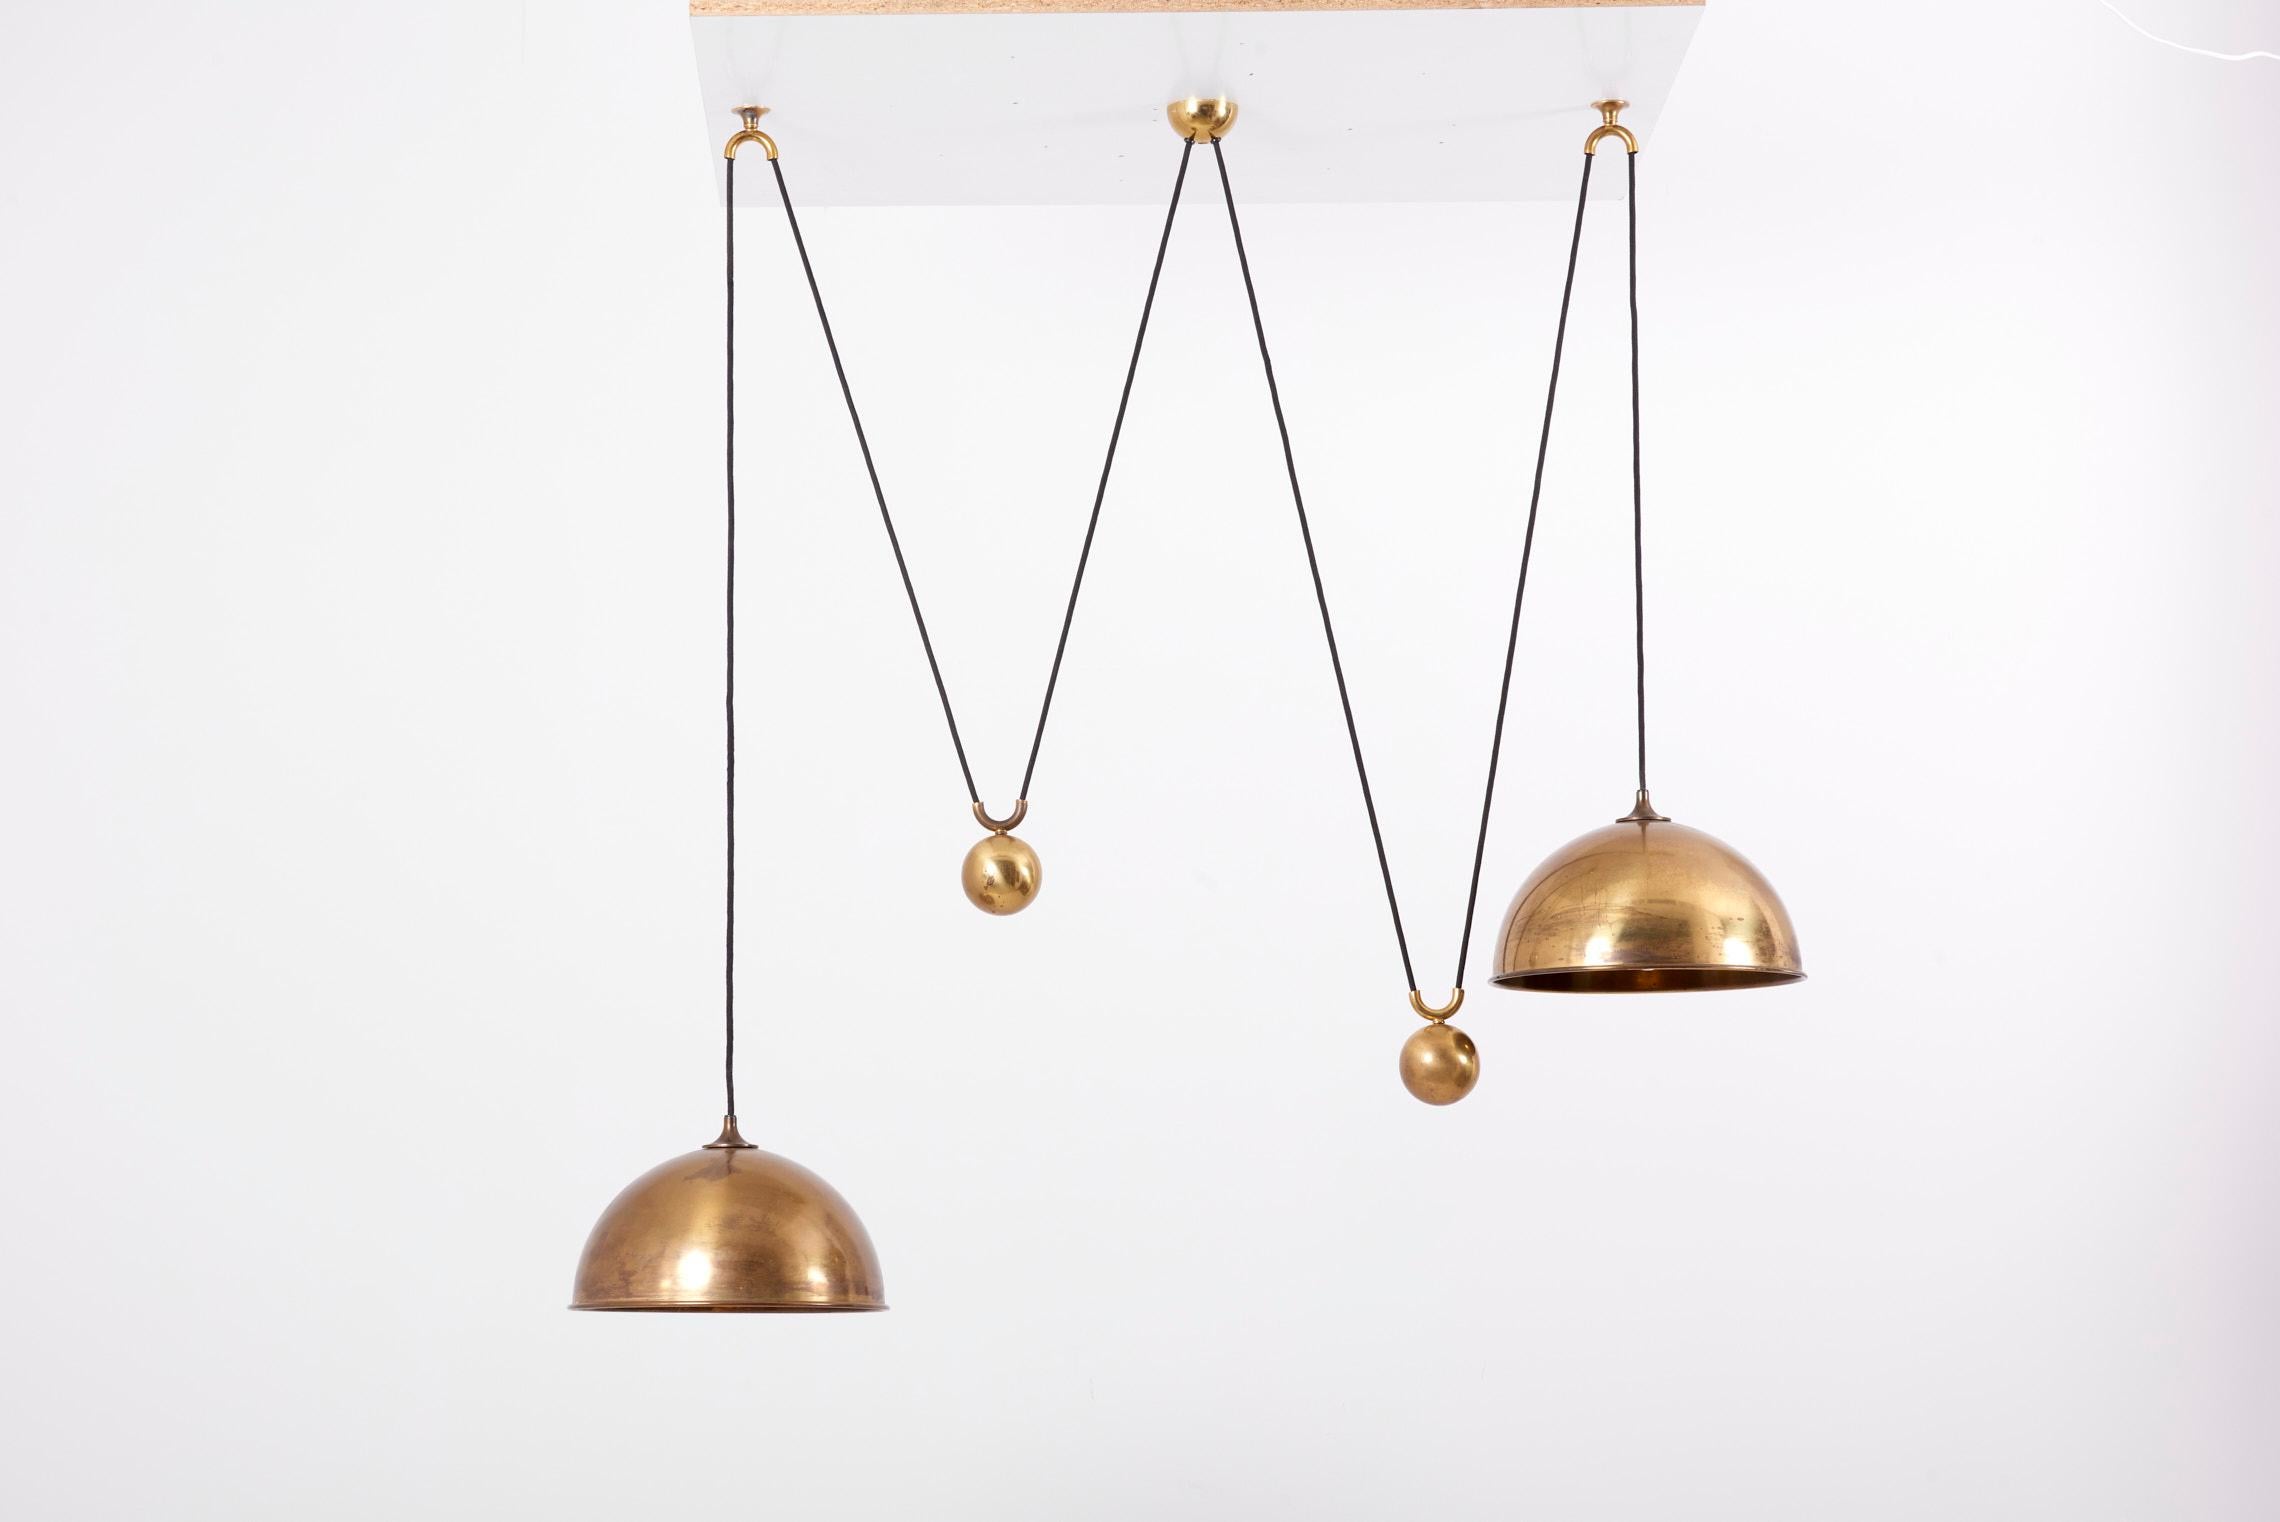 Brass Double Posa Pendant Lamp with Side Counter Weights by Florian Schulz, 1970s